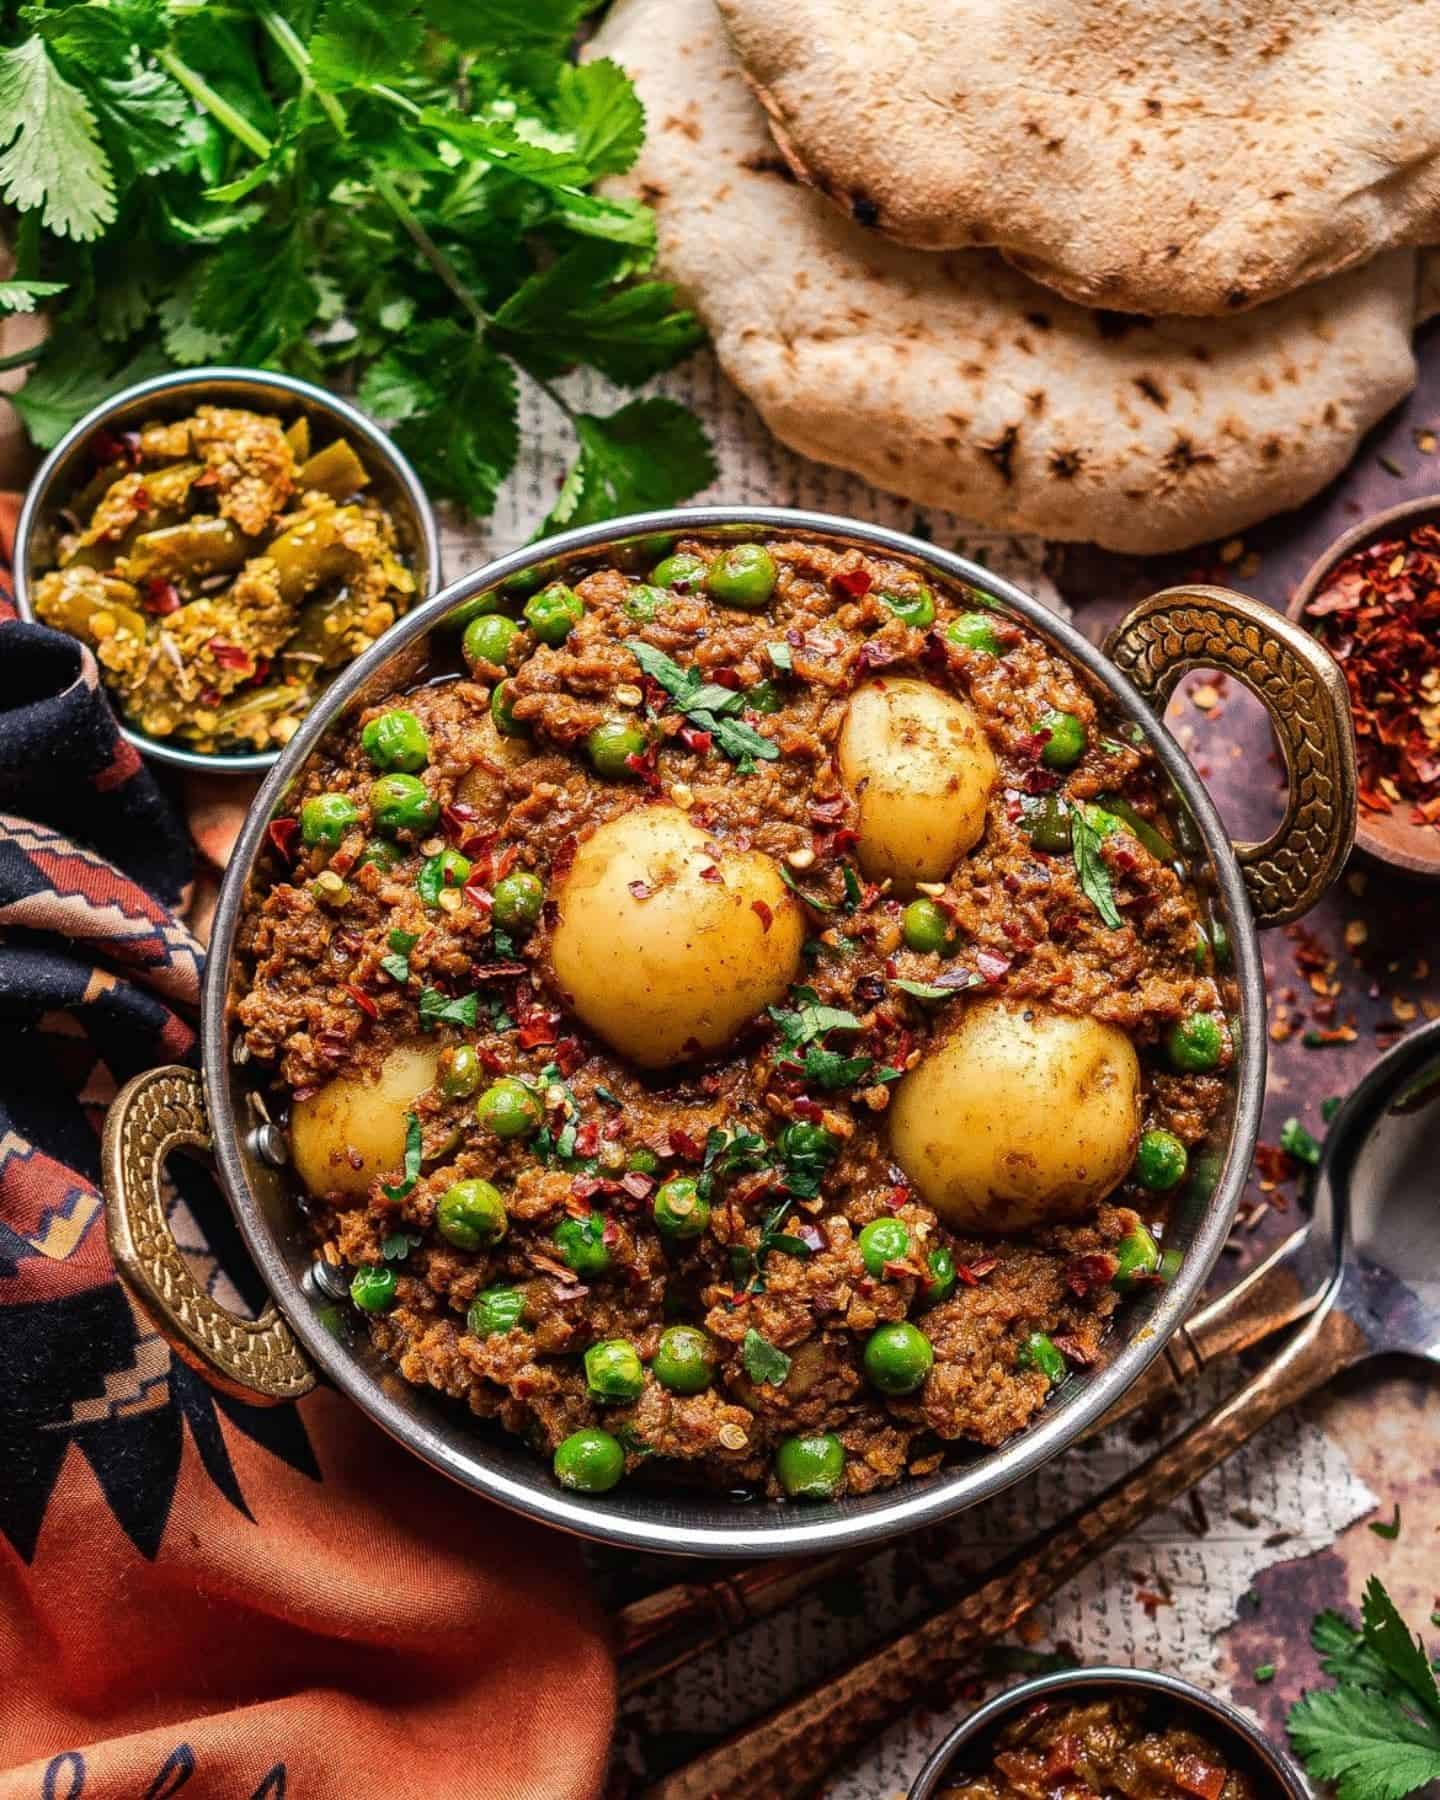 Vegan Keema in a balti dish showing potatoes and peas, with Indian bread and chutney in the background